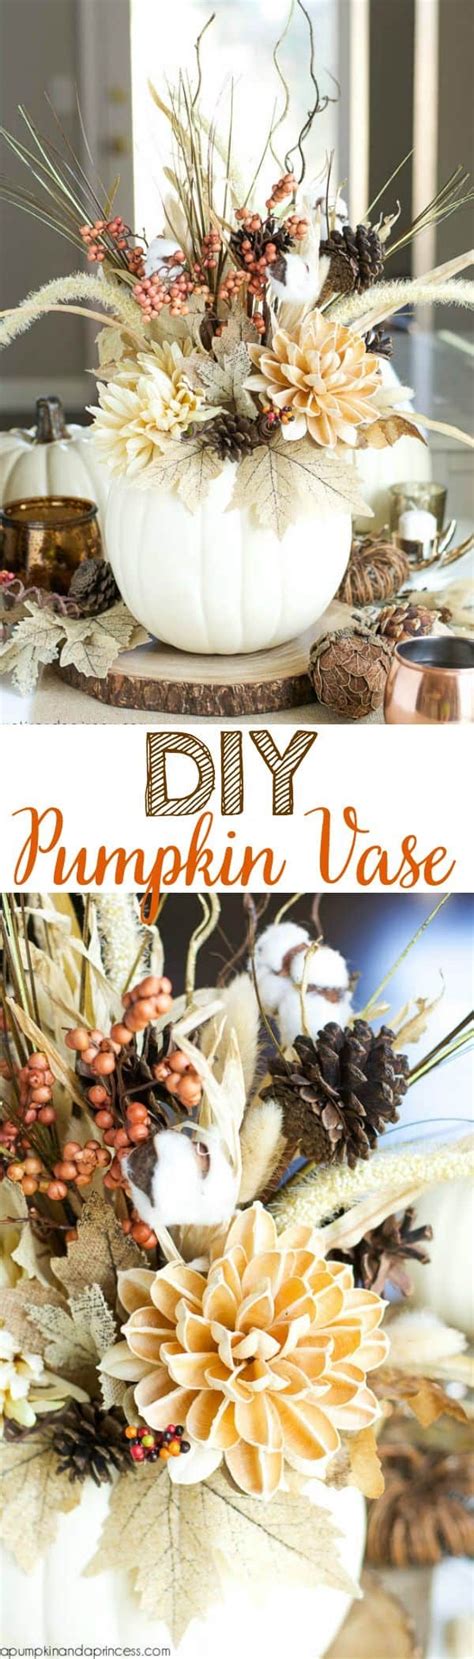 21 amazingly falltastic thanksgiving crafts for adults diy projects